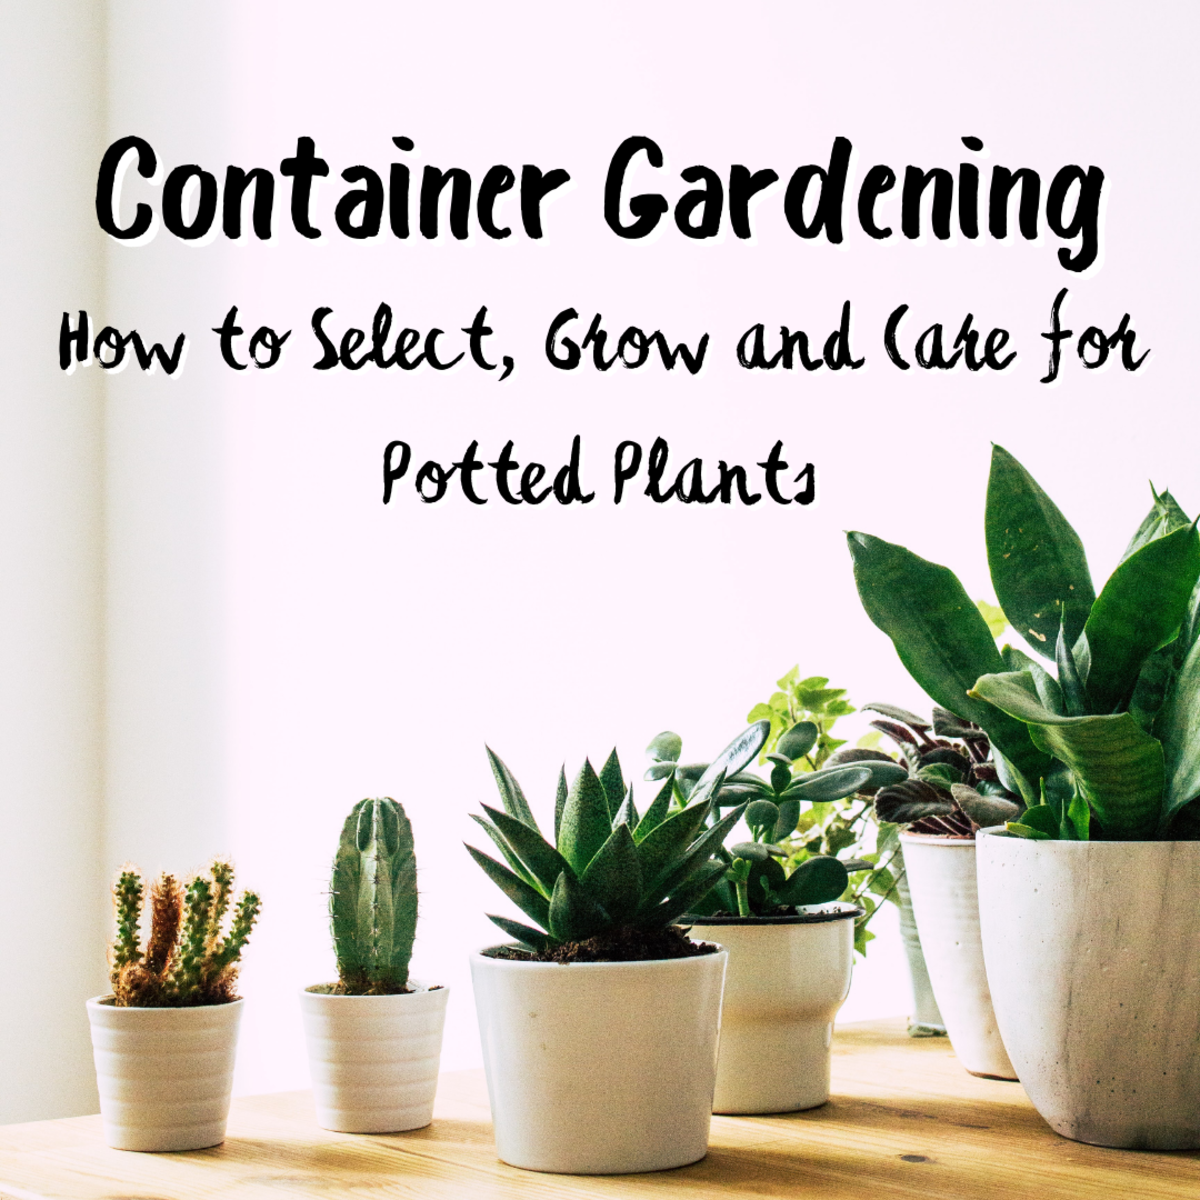 Outdoor Container Gardening: Planting a Pot of Flowers